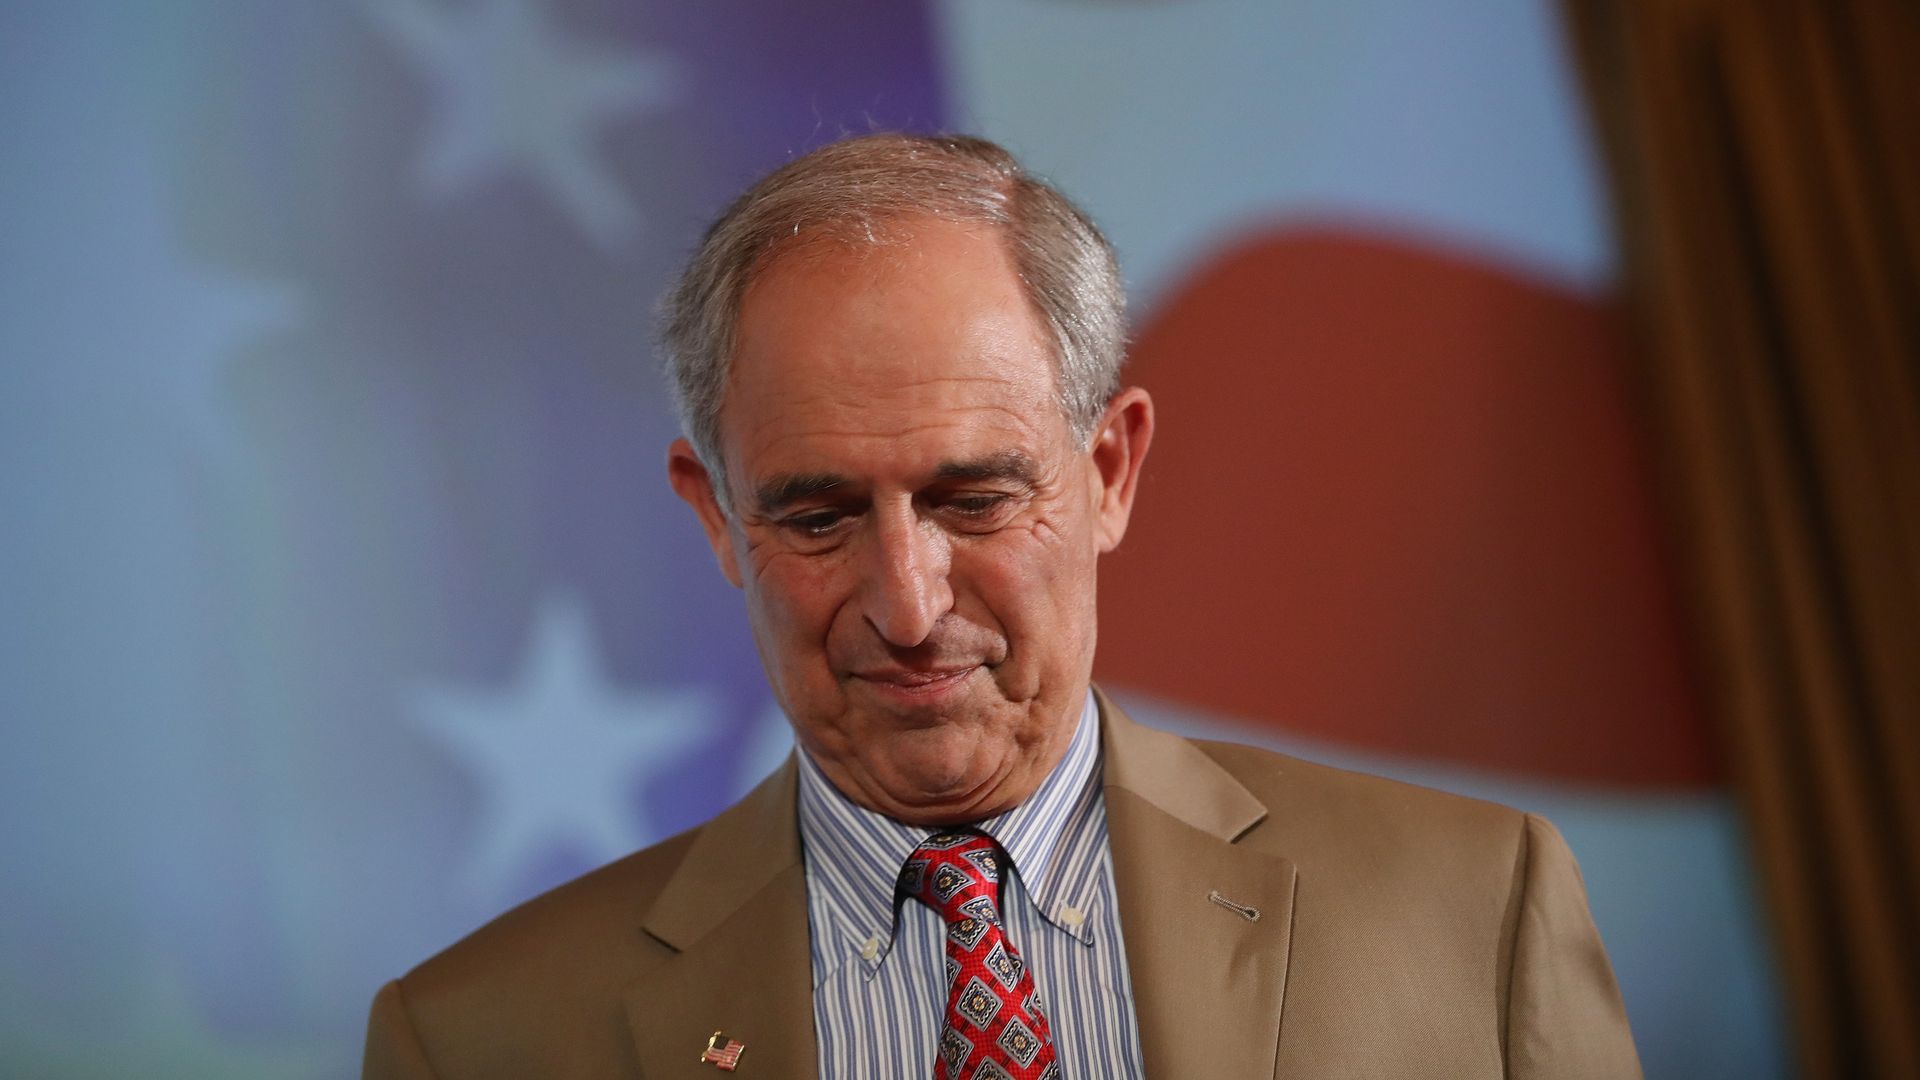 Lanny Davis looks down while on stage